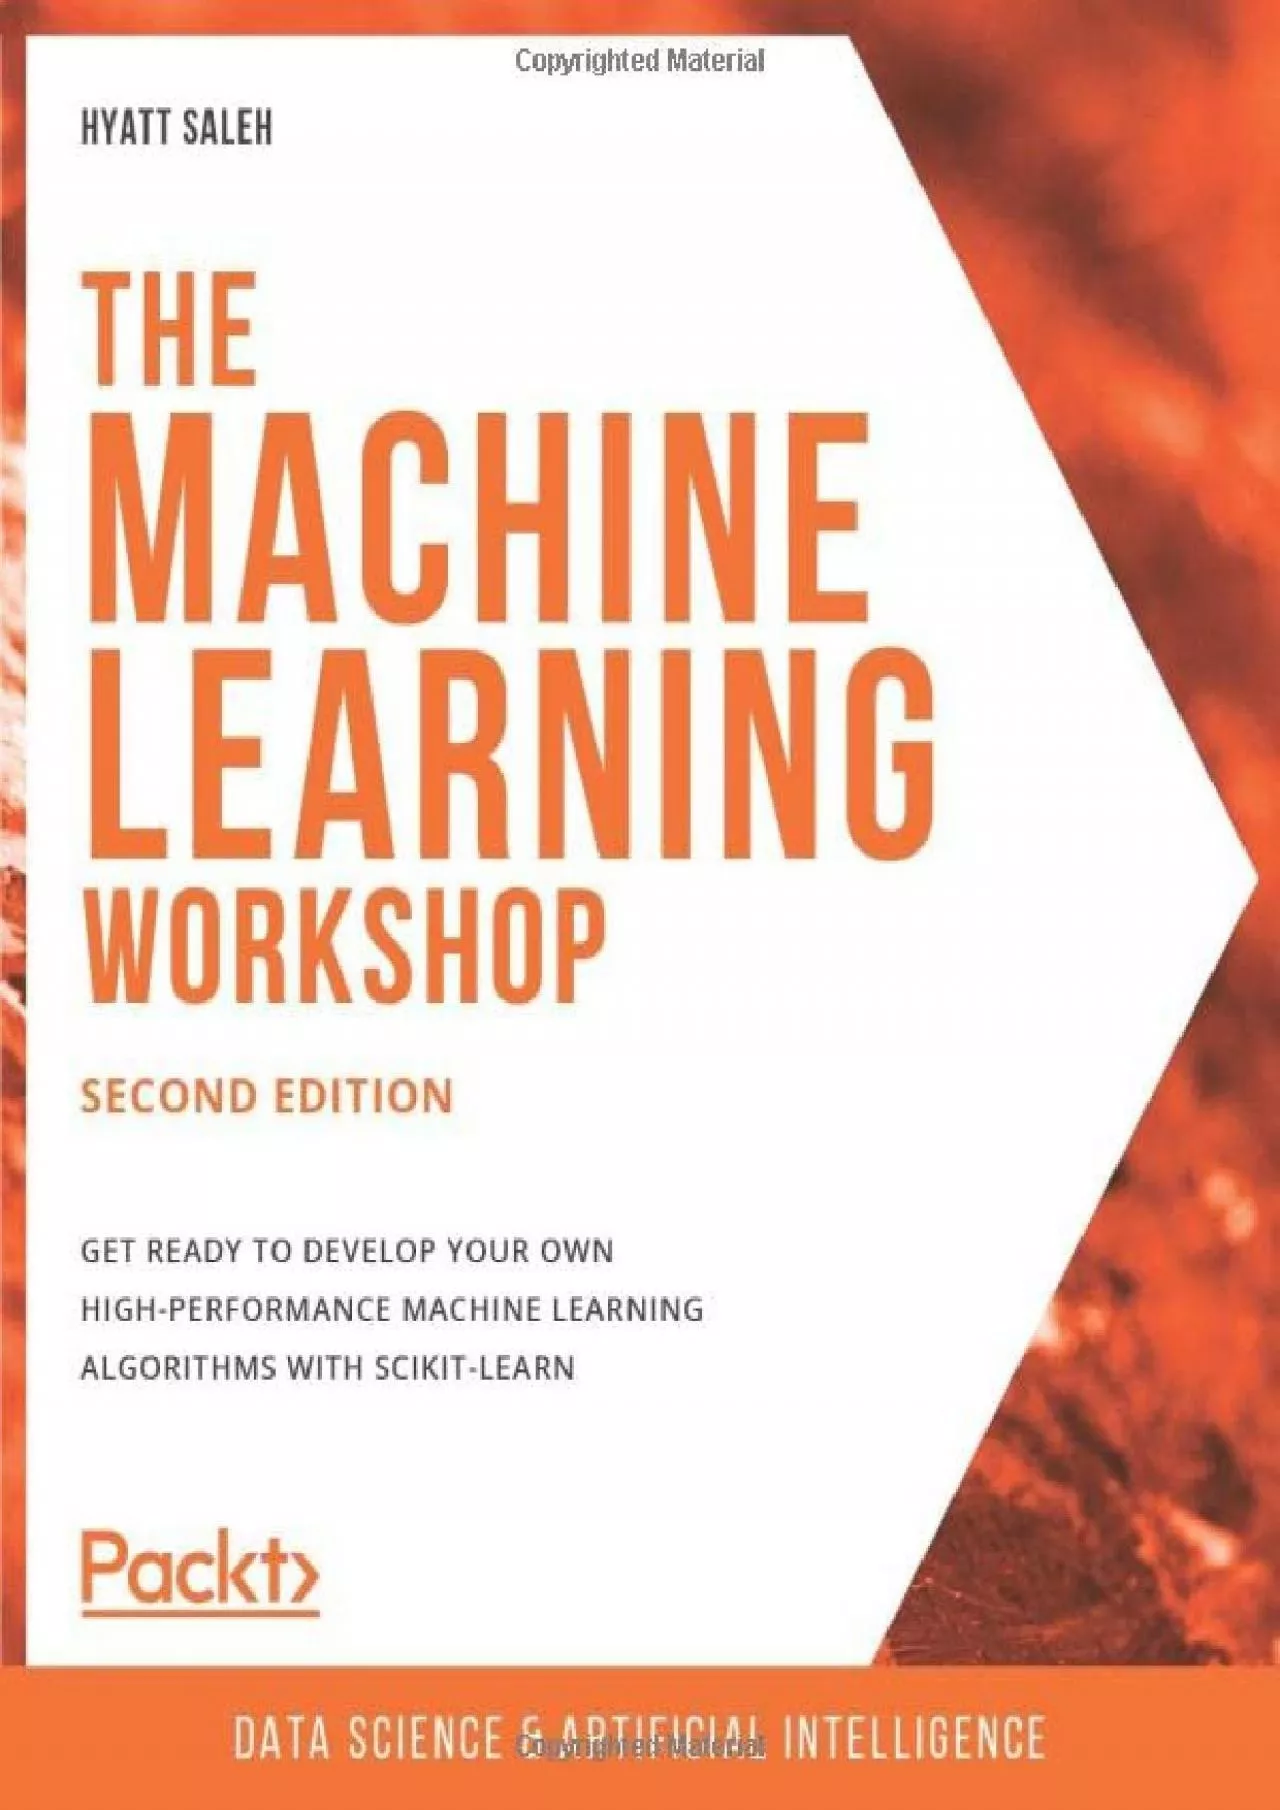 [FREE]-The Machine Learning Workshop Get ready to develop your own high-performance machine